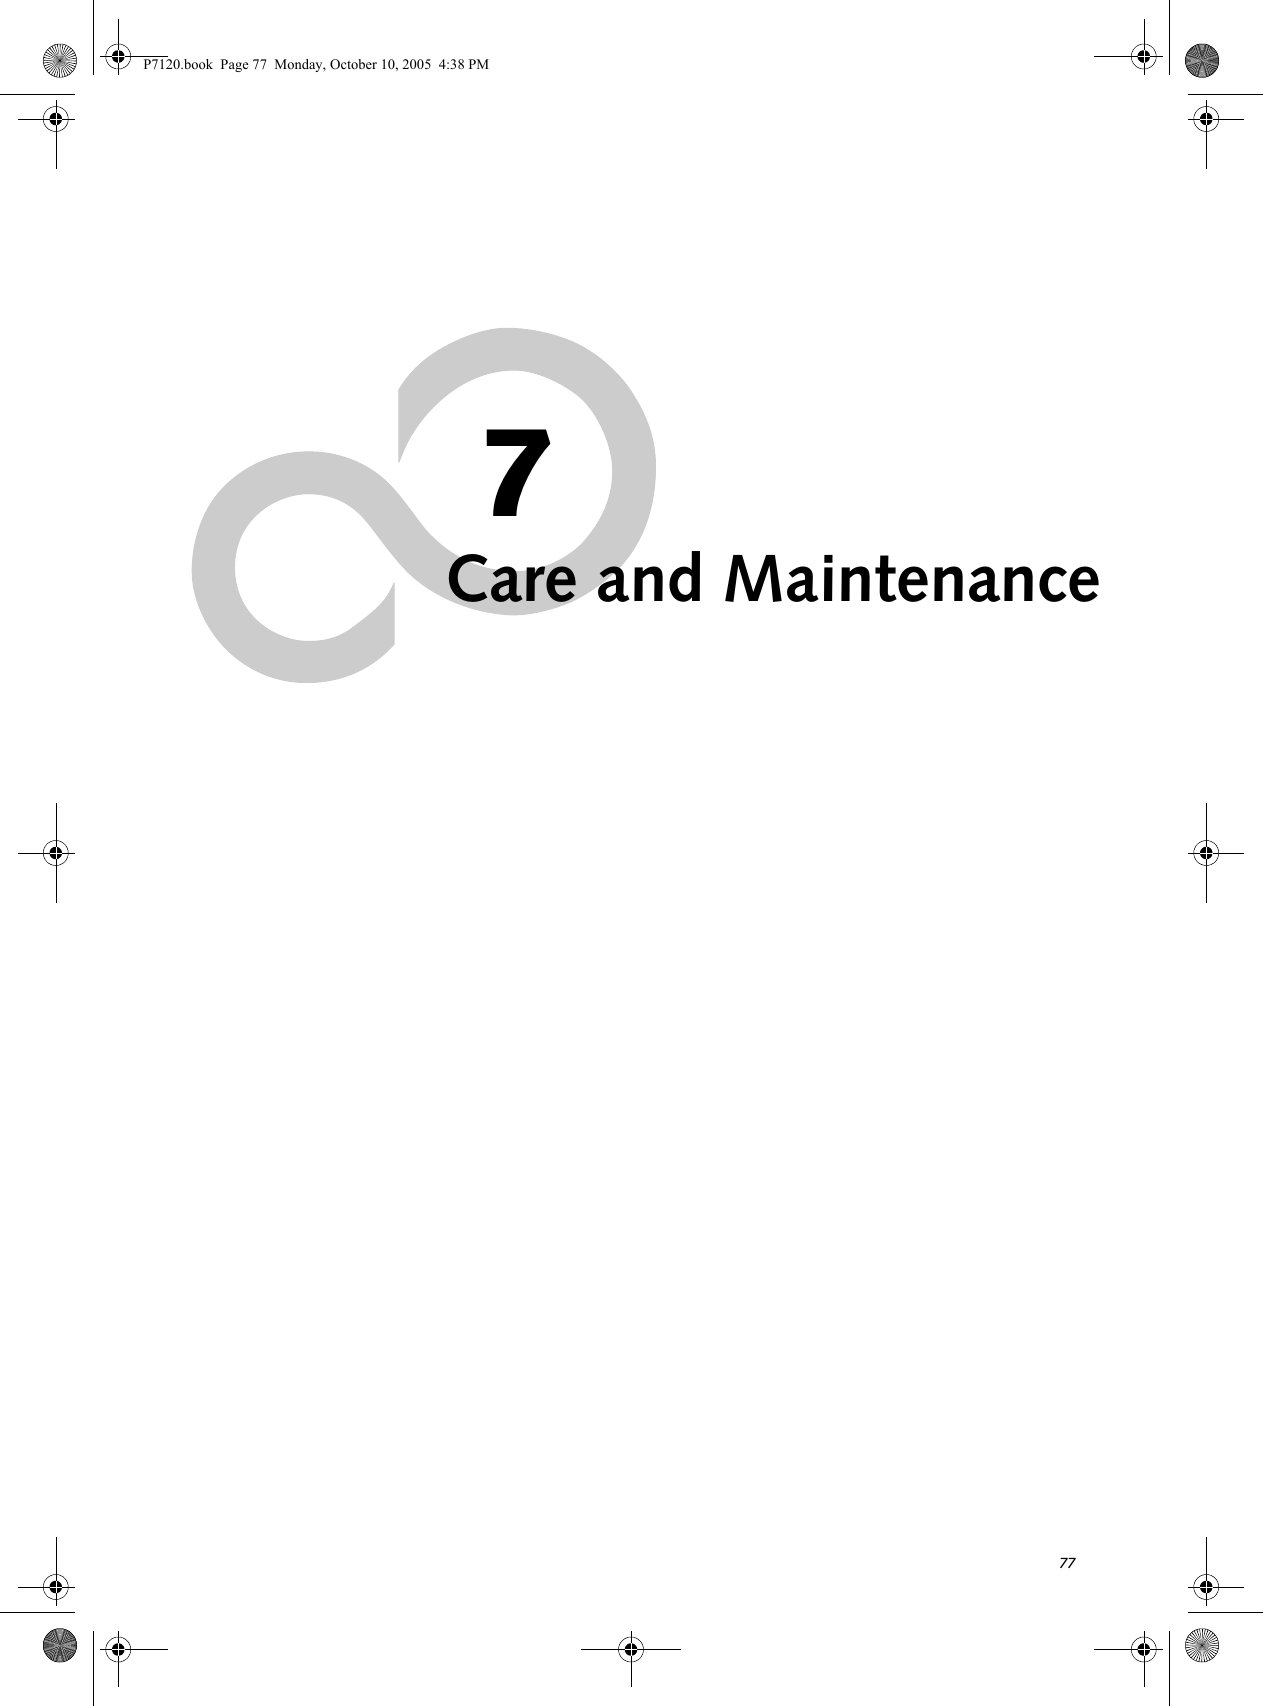 777Care and MaintenanceP7120.book  Page 77  Monday, October 10, 2005  4:38 PM